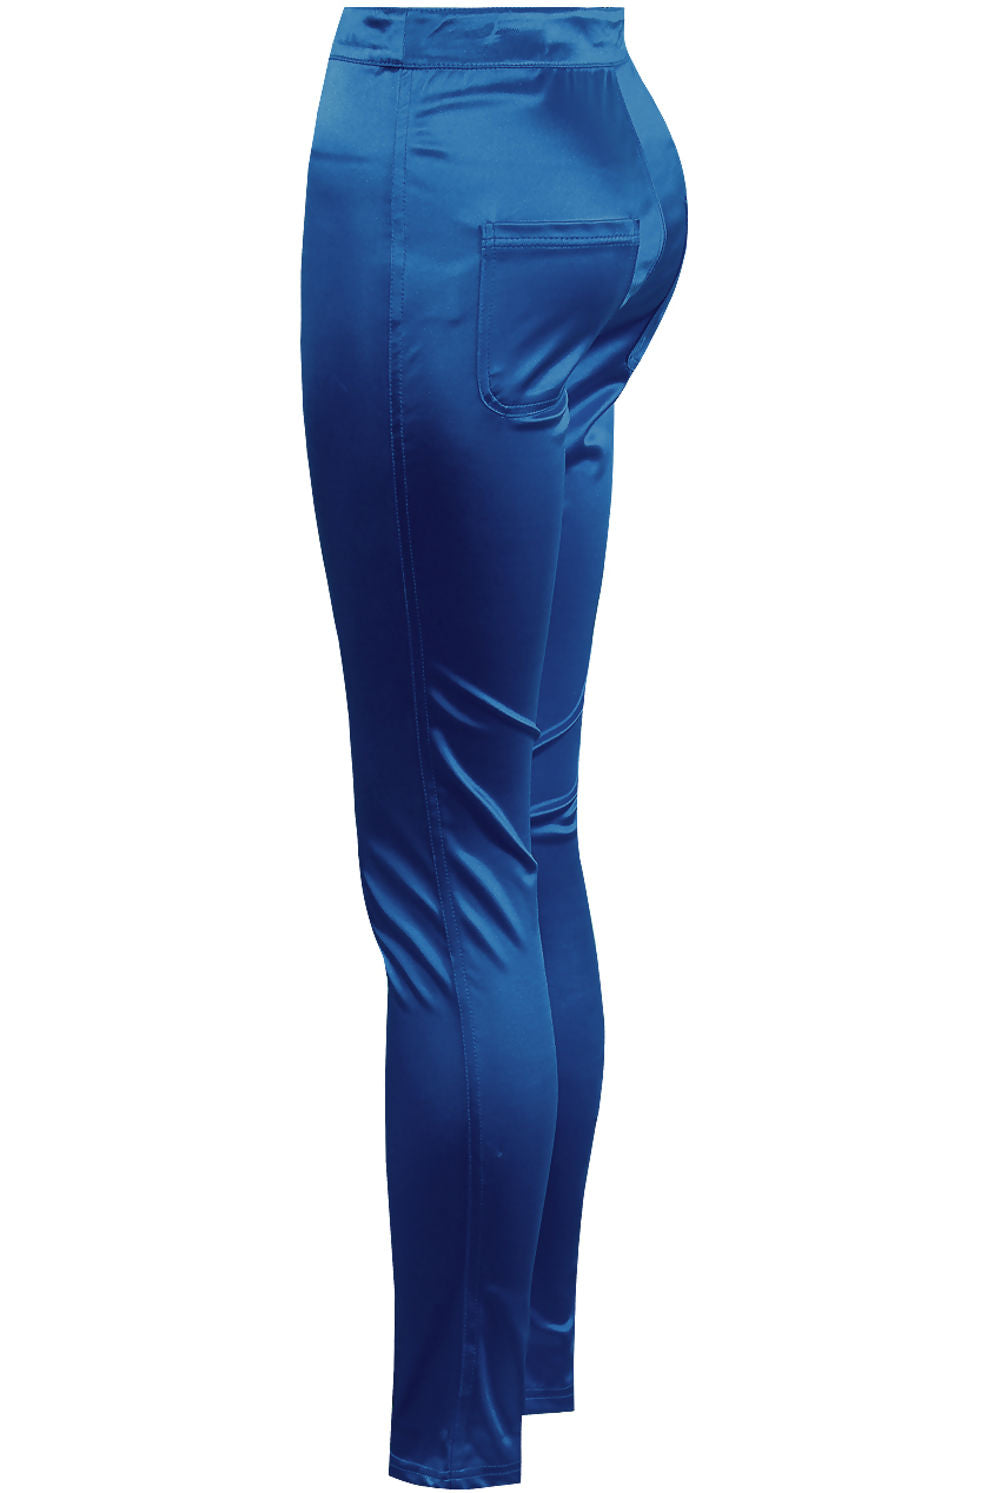 Ghost manequin wears a royal blue satin skinny fit jeans.  Ghost manequin stands to the side. The back of the trousers is visible, showing the back pocket. 